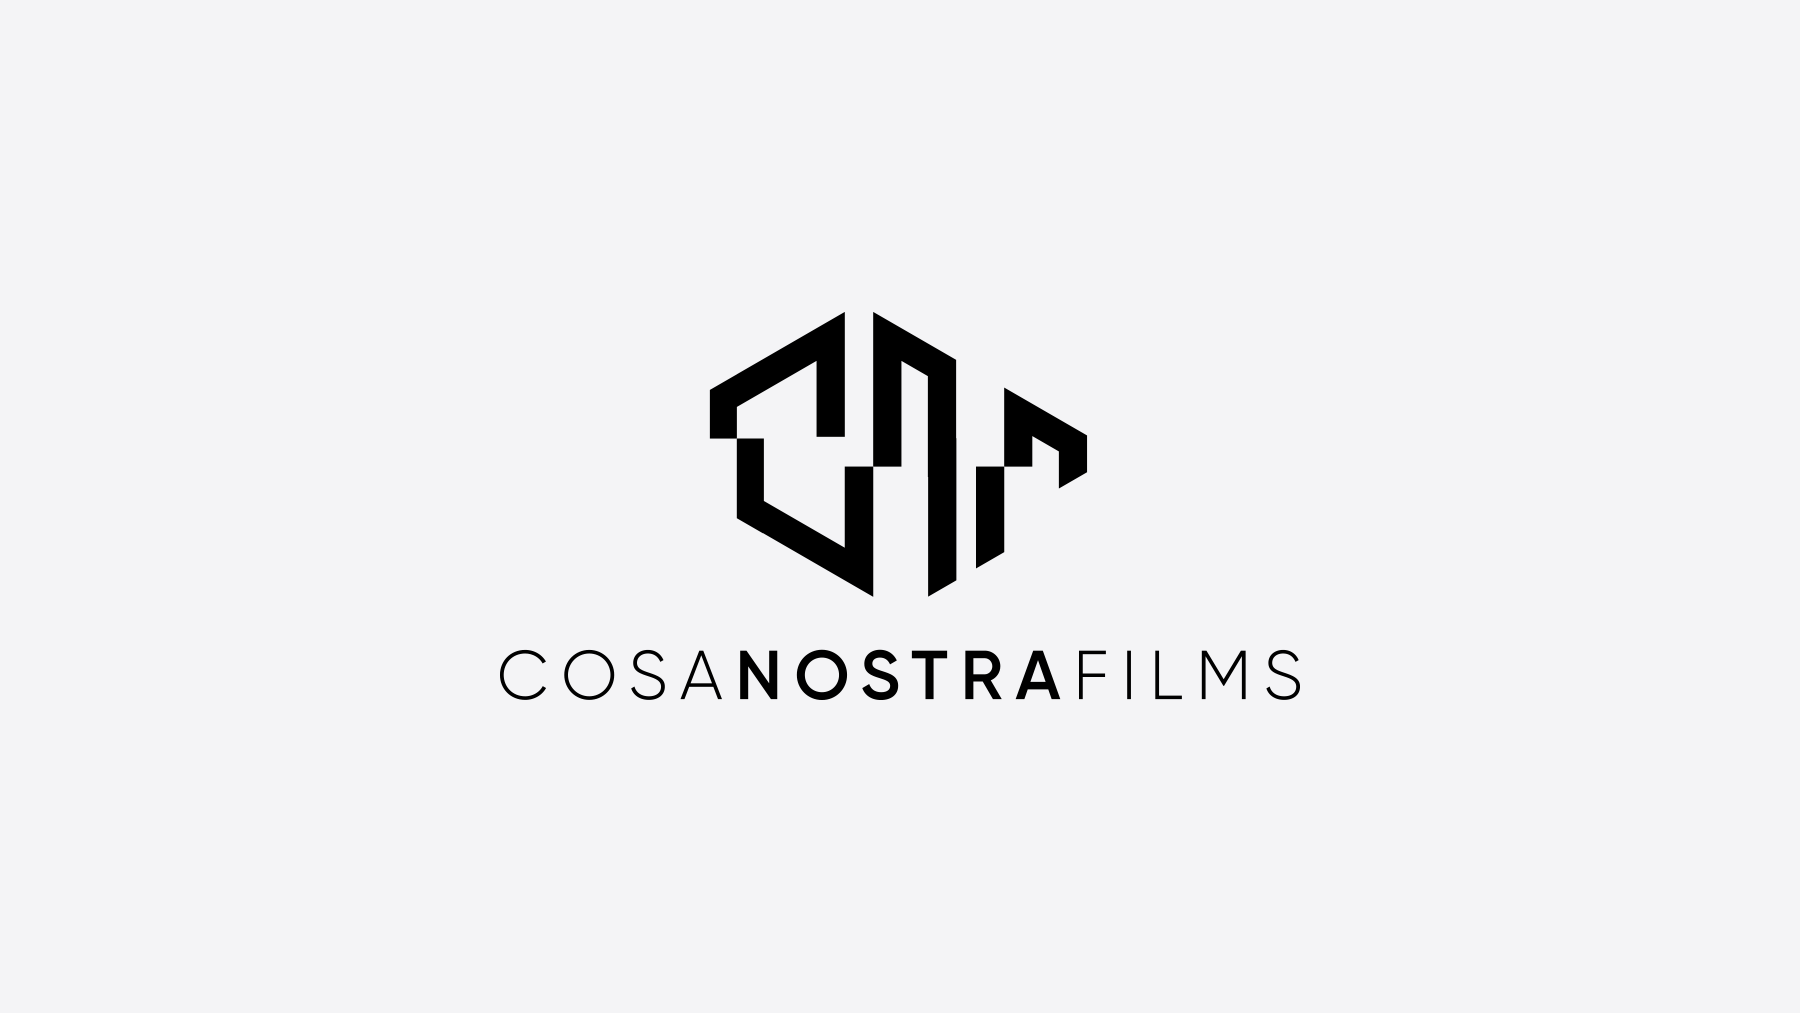 Cosa Nostra Films logo design on an off-white background.